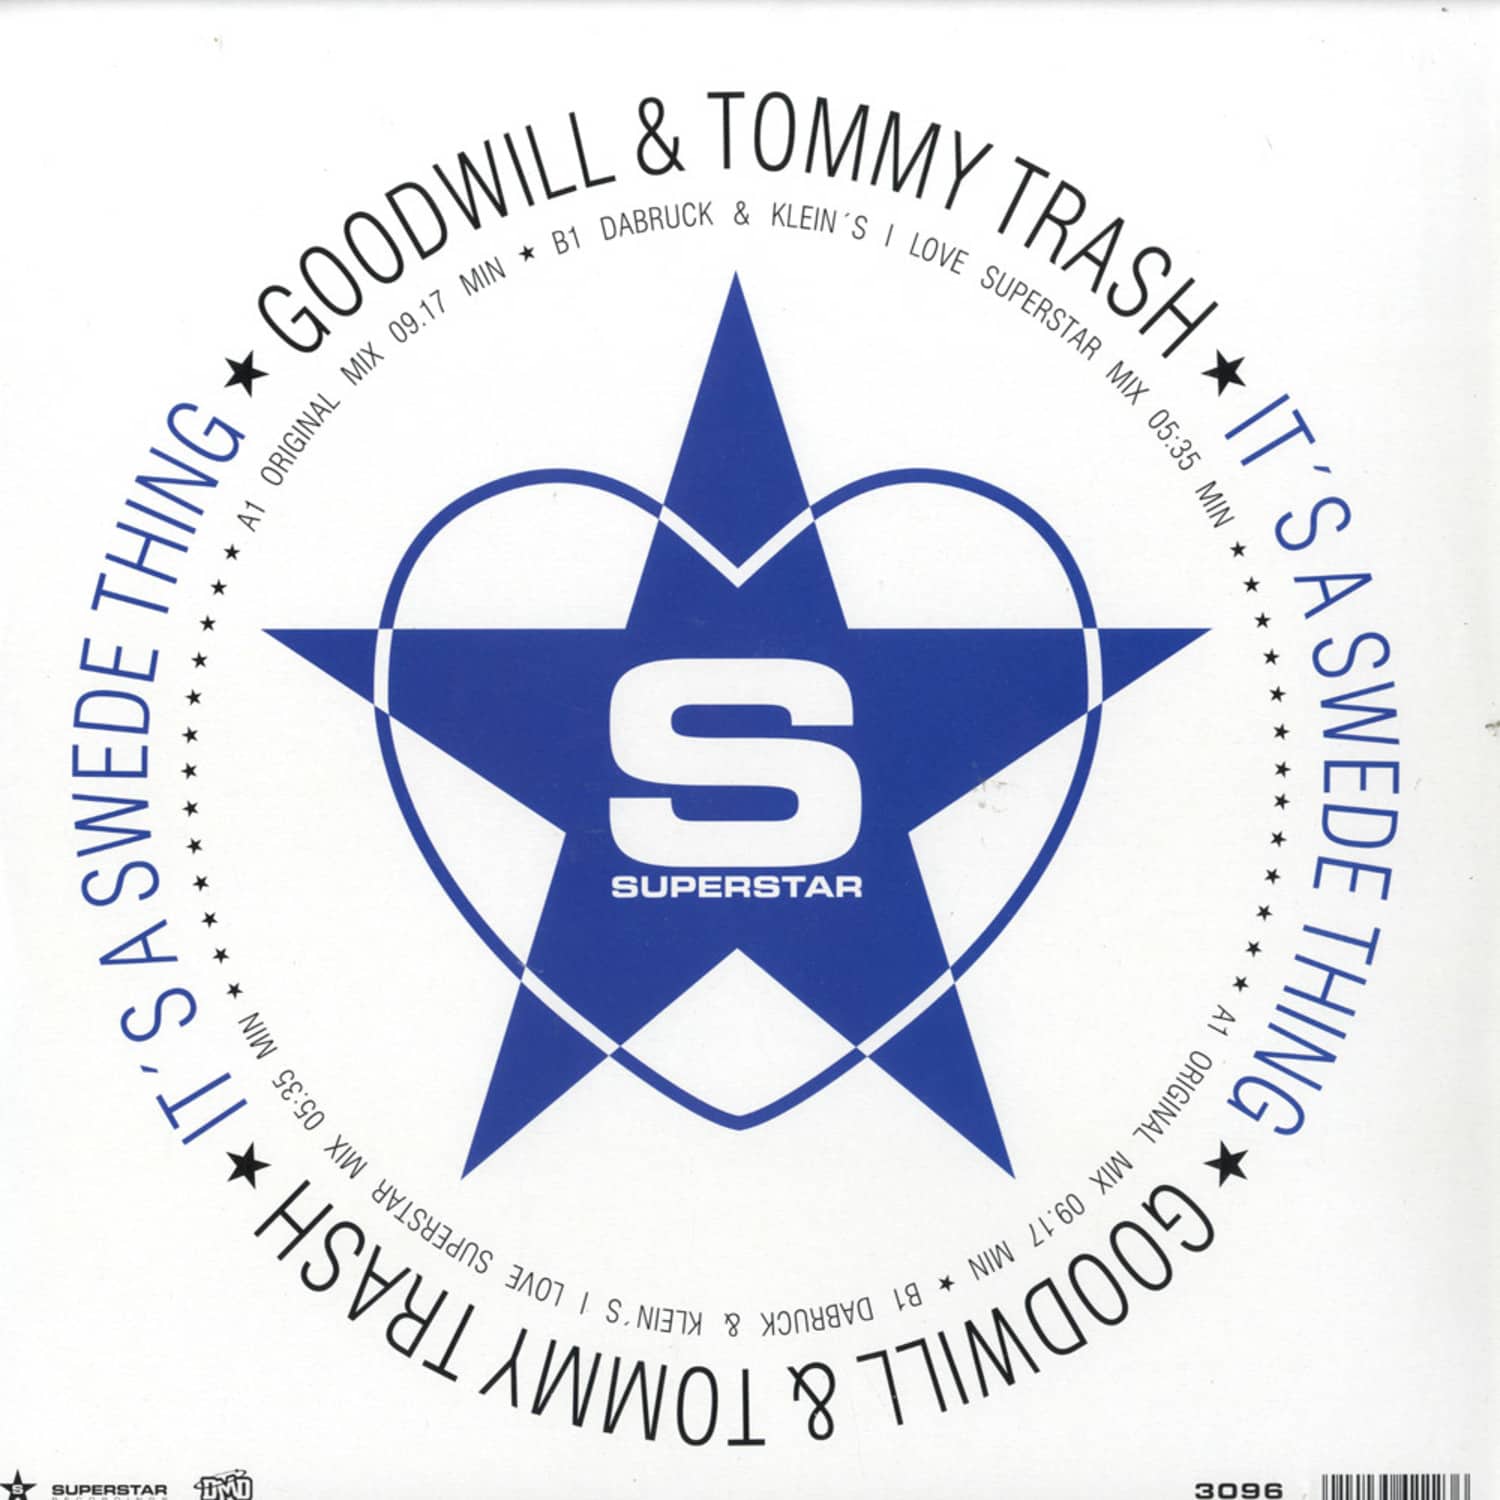 Goodwill & Tommy Trash - ITS A SWEDE THING